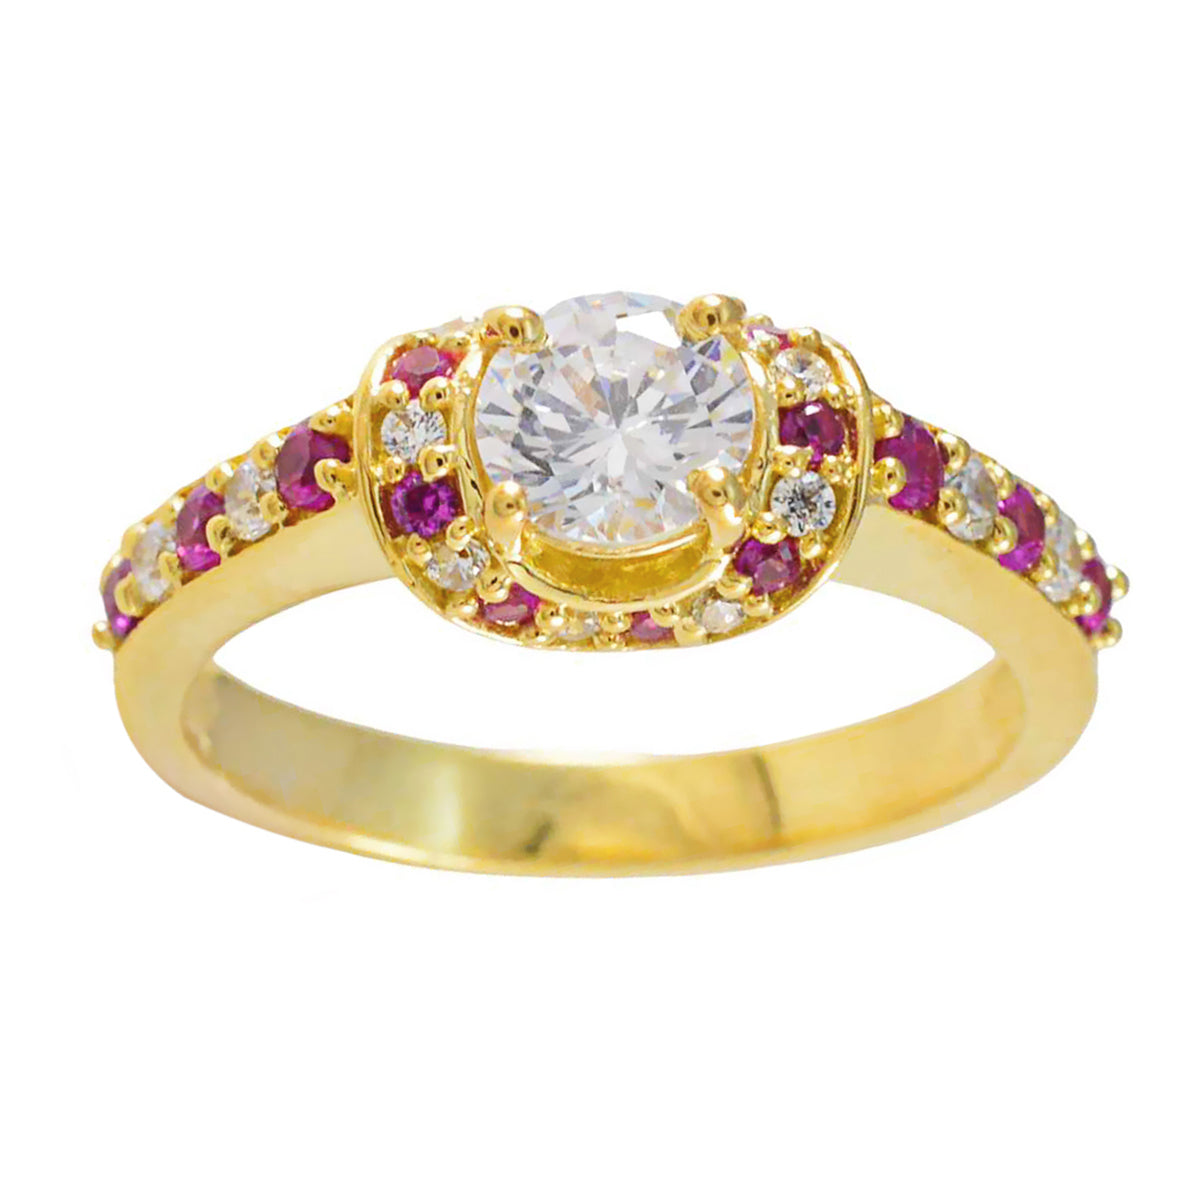 Riyo Choice Silver Ring With Yellow Gold Plating Ruby CZ Stone Round Shape Prong Setting Bridal Jewelry Christmas Ring